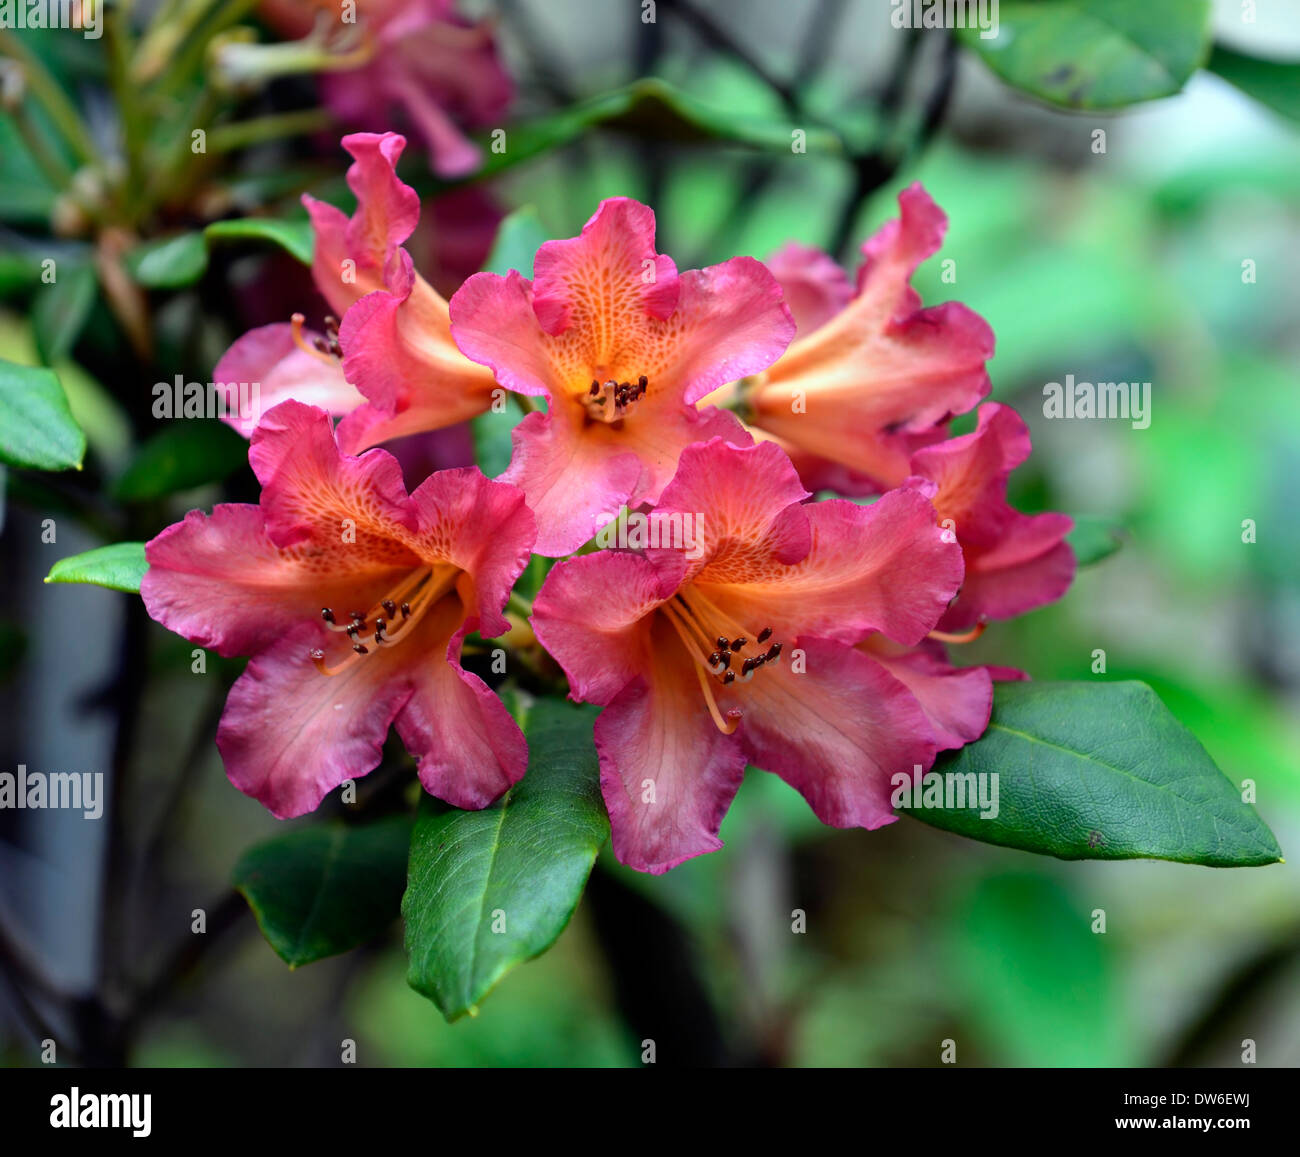 rhododendron dichroanthum scyphocalyx pink orange flowers flower flowering evergreen green leaves foliage tree trees Stock Photo